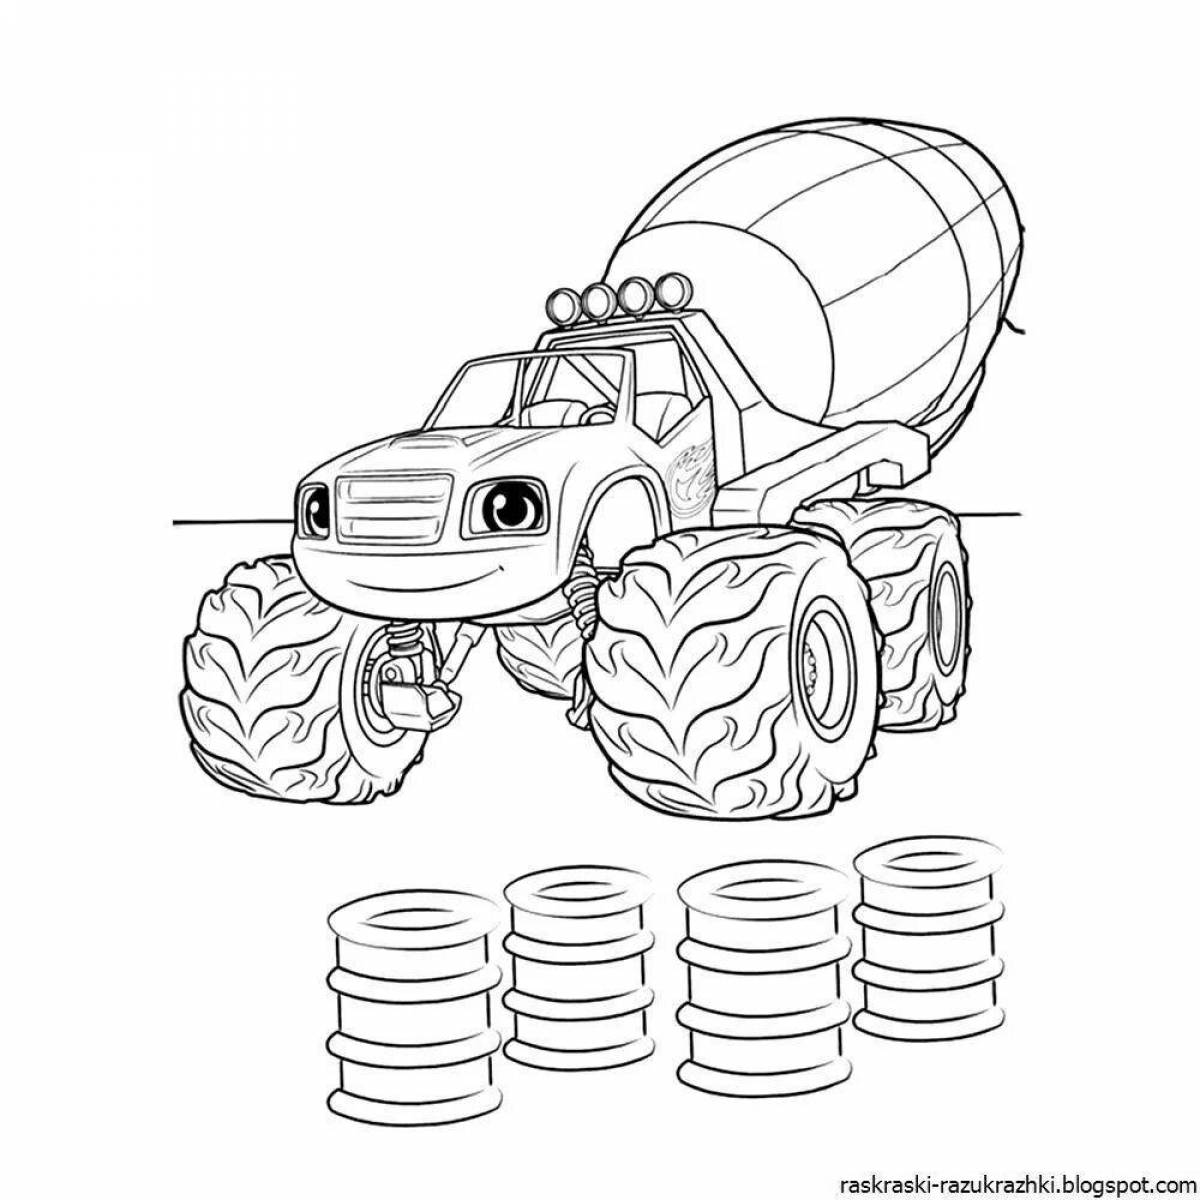 Great wonder cars coloring pages for kids